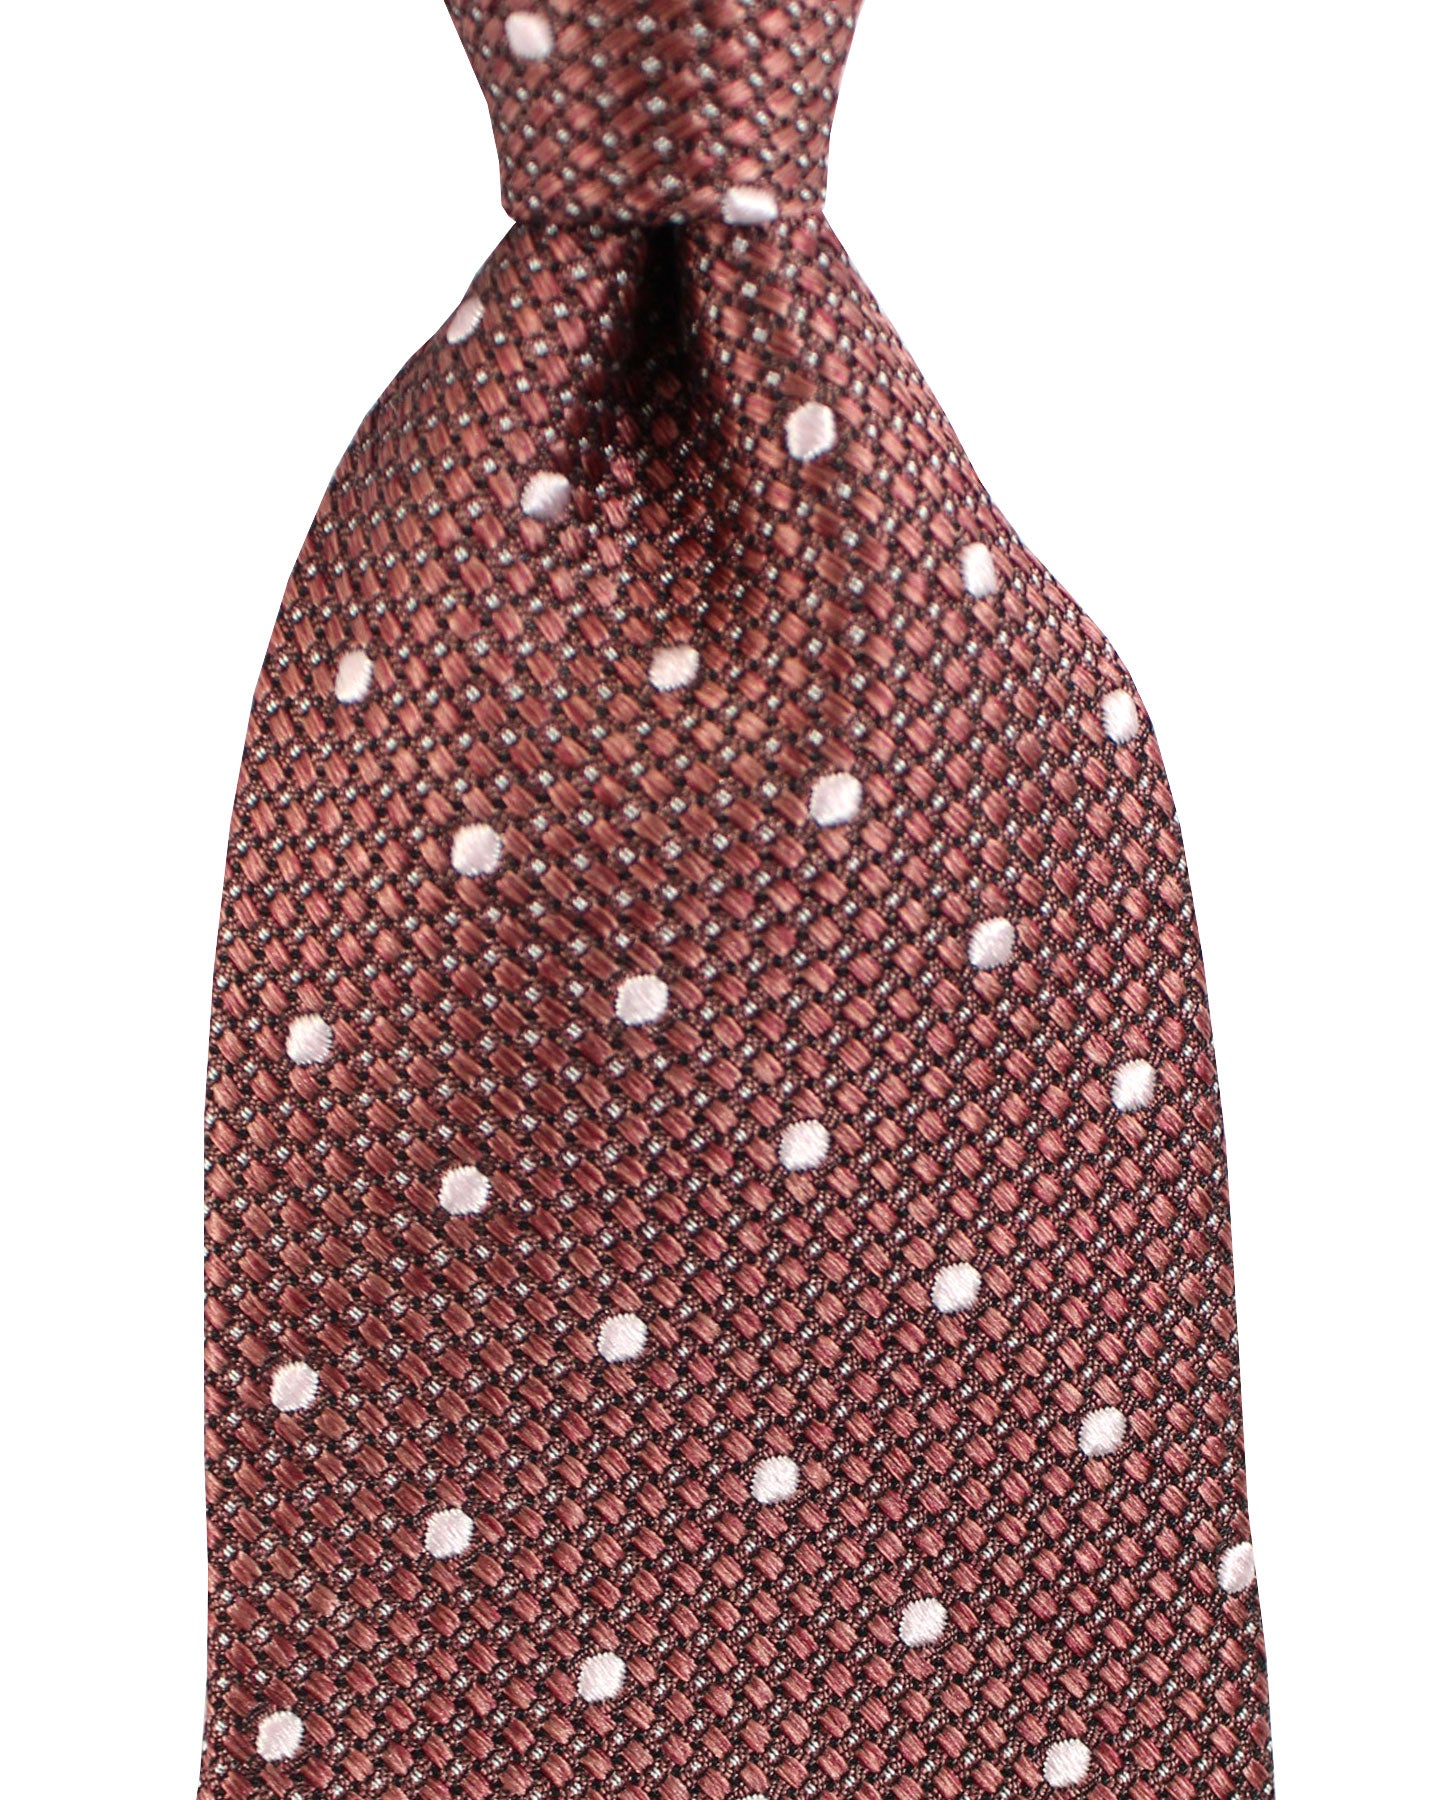 Tom Ford Tie Dust Pink Dots